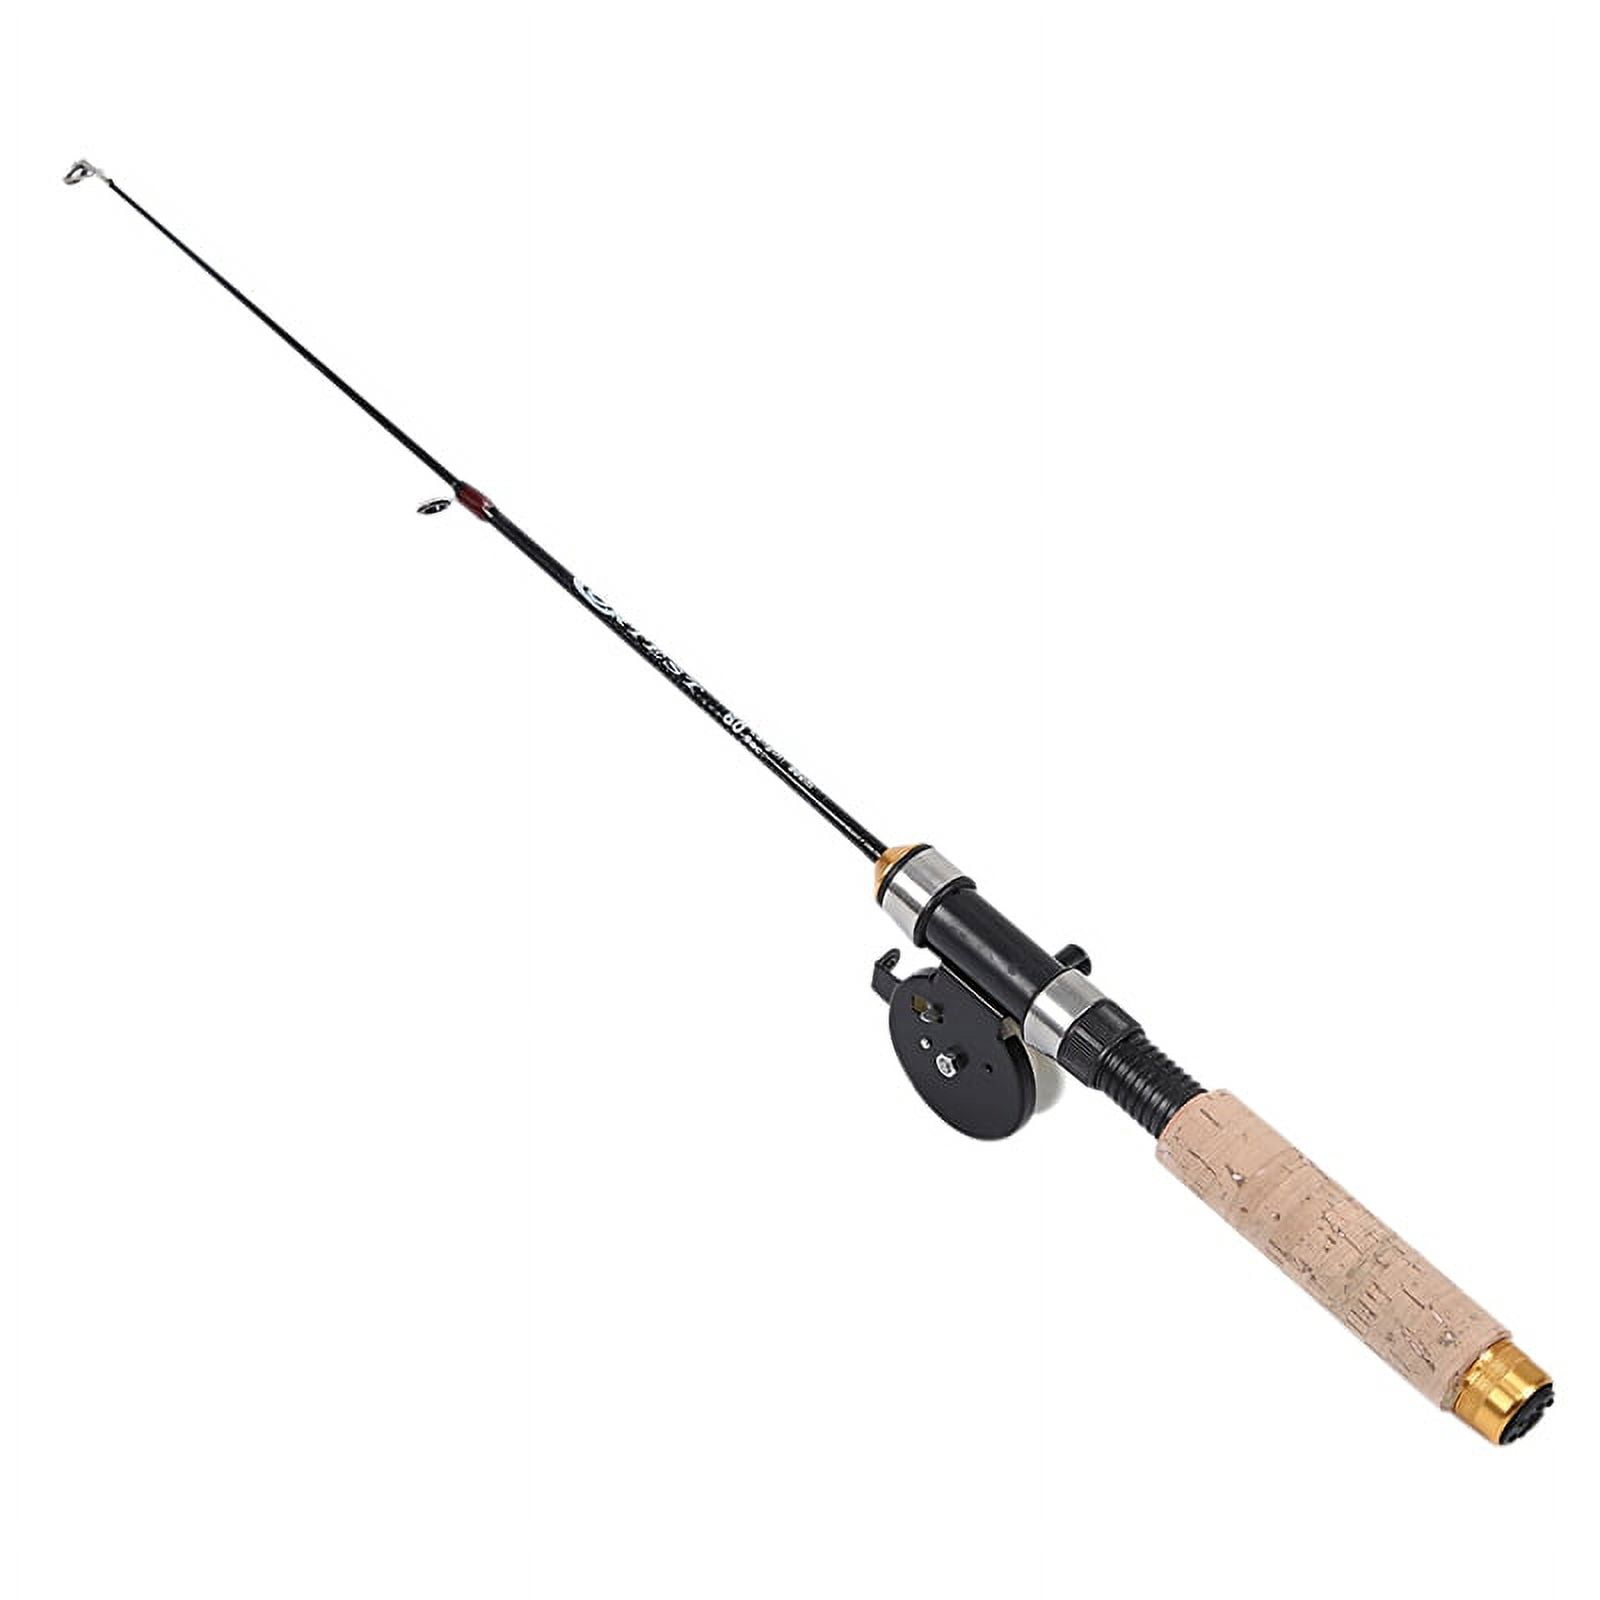 65cm 2Tips Rod Reel Combos Winter Ice Fishing Rod Fishing Reel set Rod Pole  Tackle Carbon pole Ice rod with reel Pikes fish pole